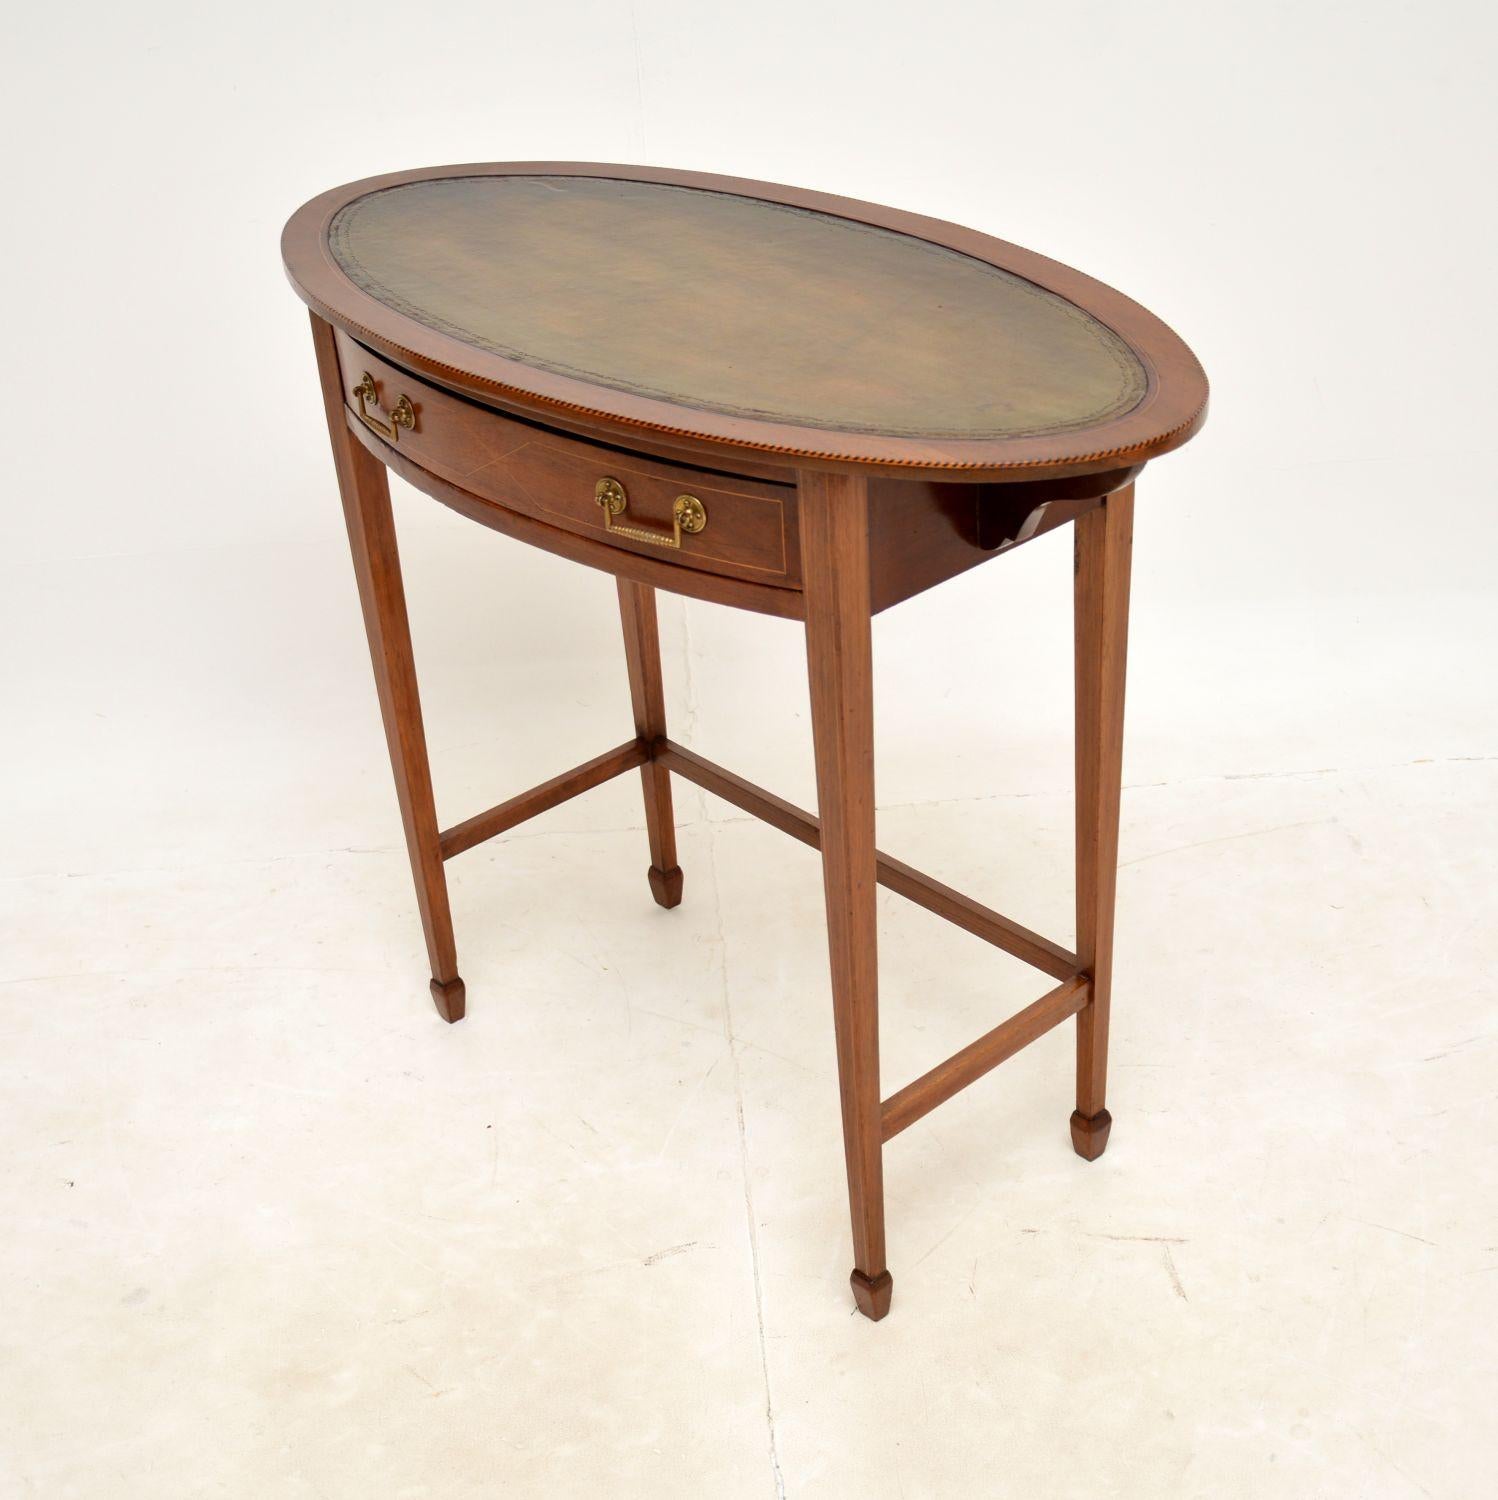 Antique Edwardian Inlaid Writing Table / Desk In Good Condition For Sale In London, GB